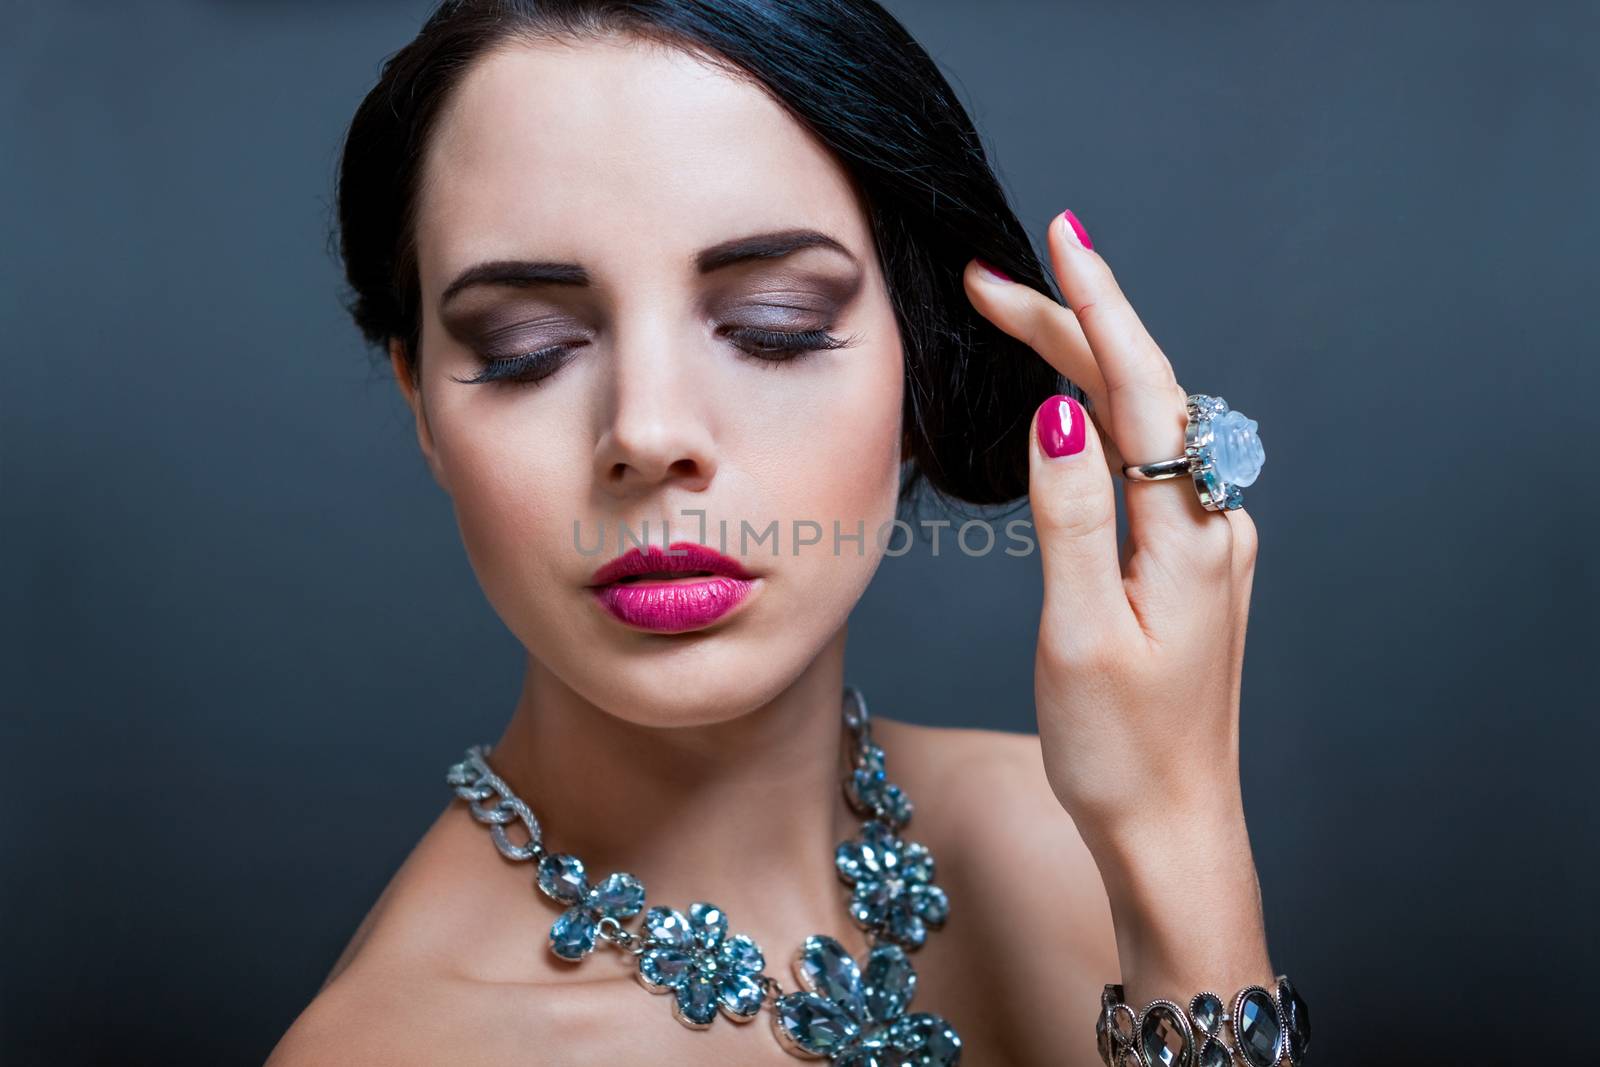 Beautiful sophisticated dark haired woman wearing elegant showy gemstone jewellery posing with bare shoulders and her hand raised gracefully to her downcast eyes with a serene expression